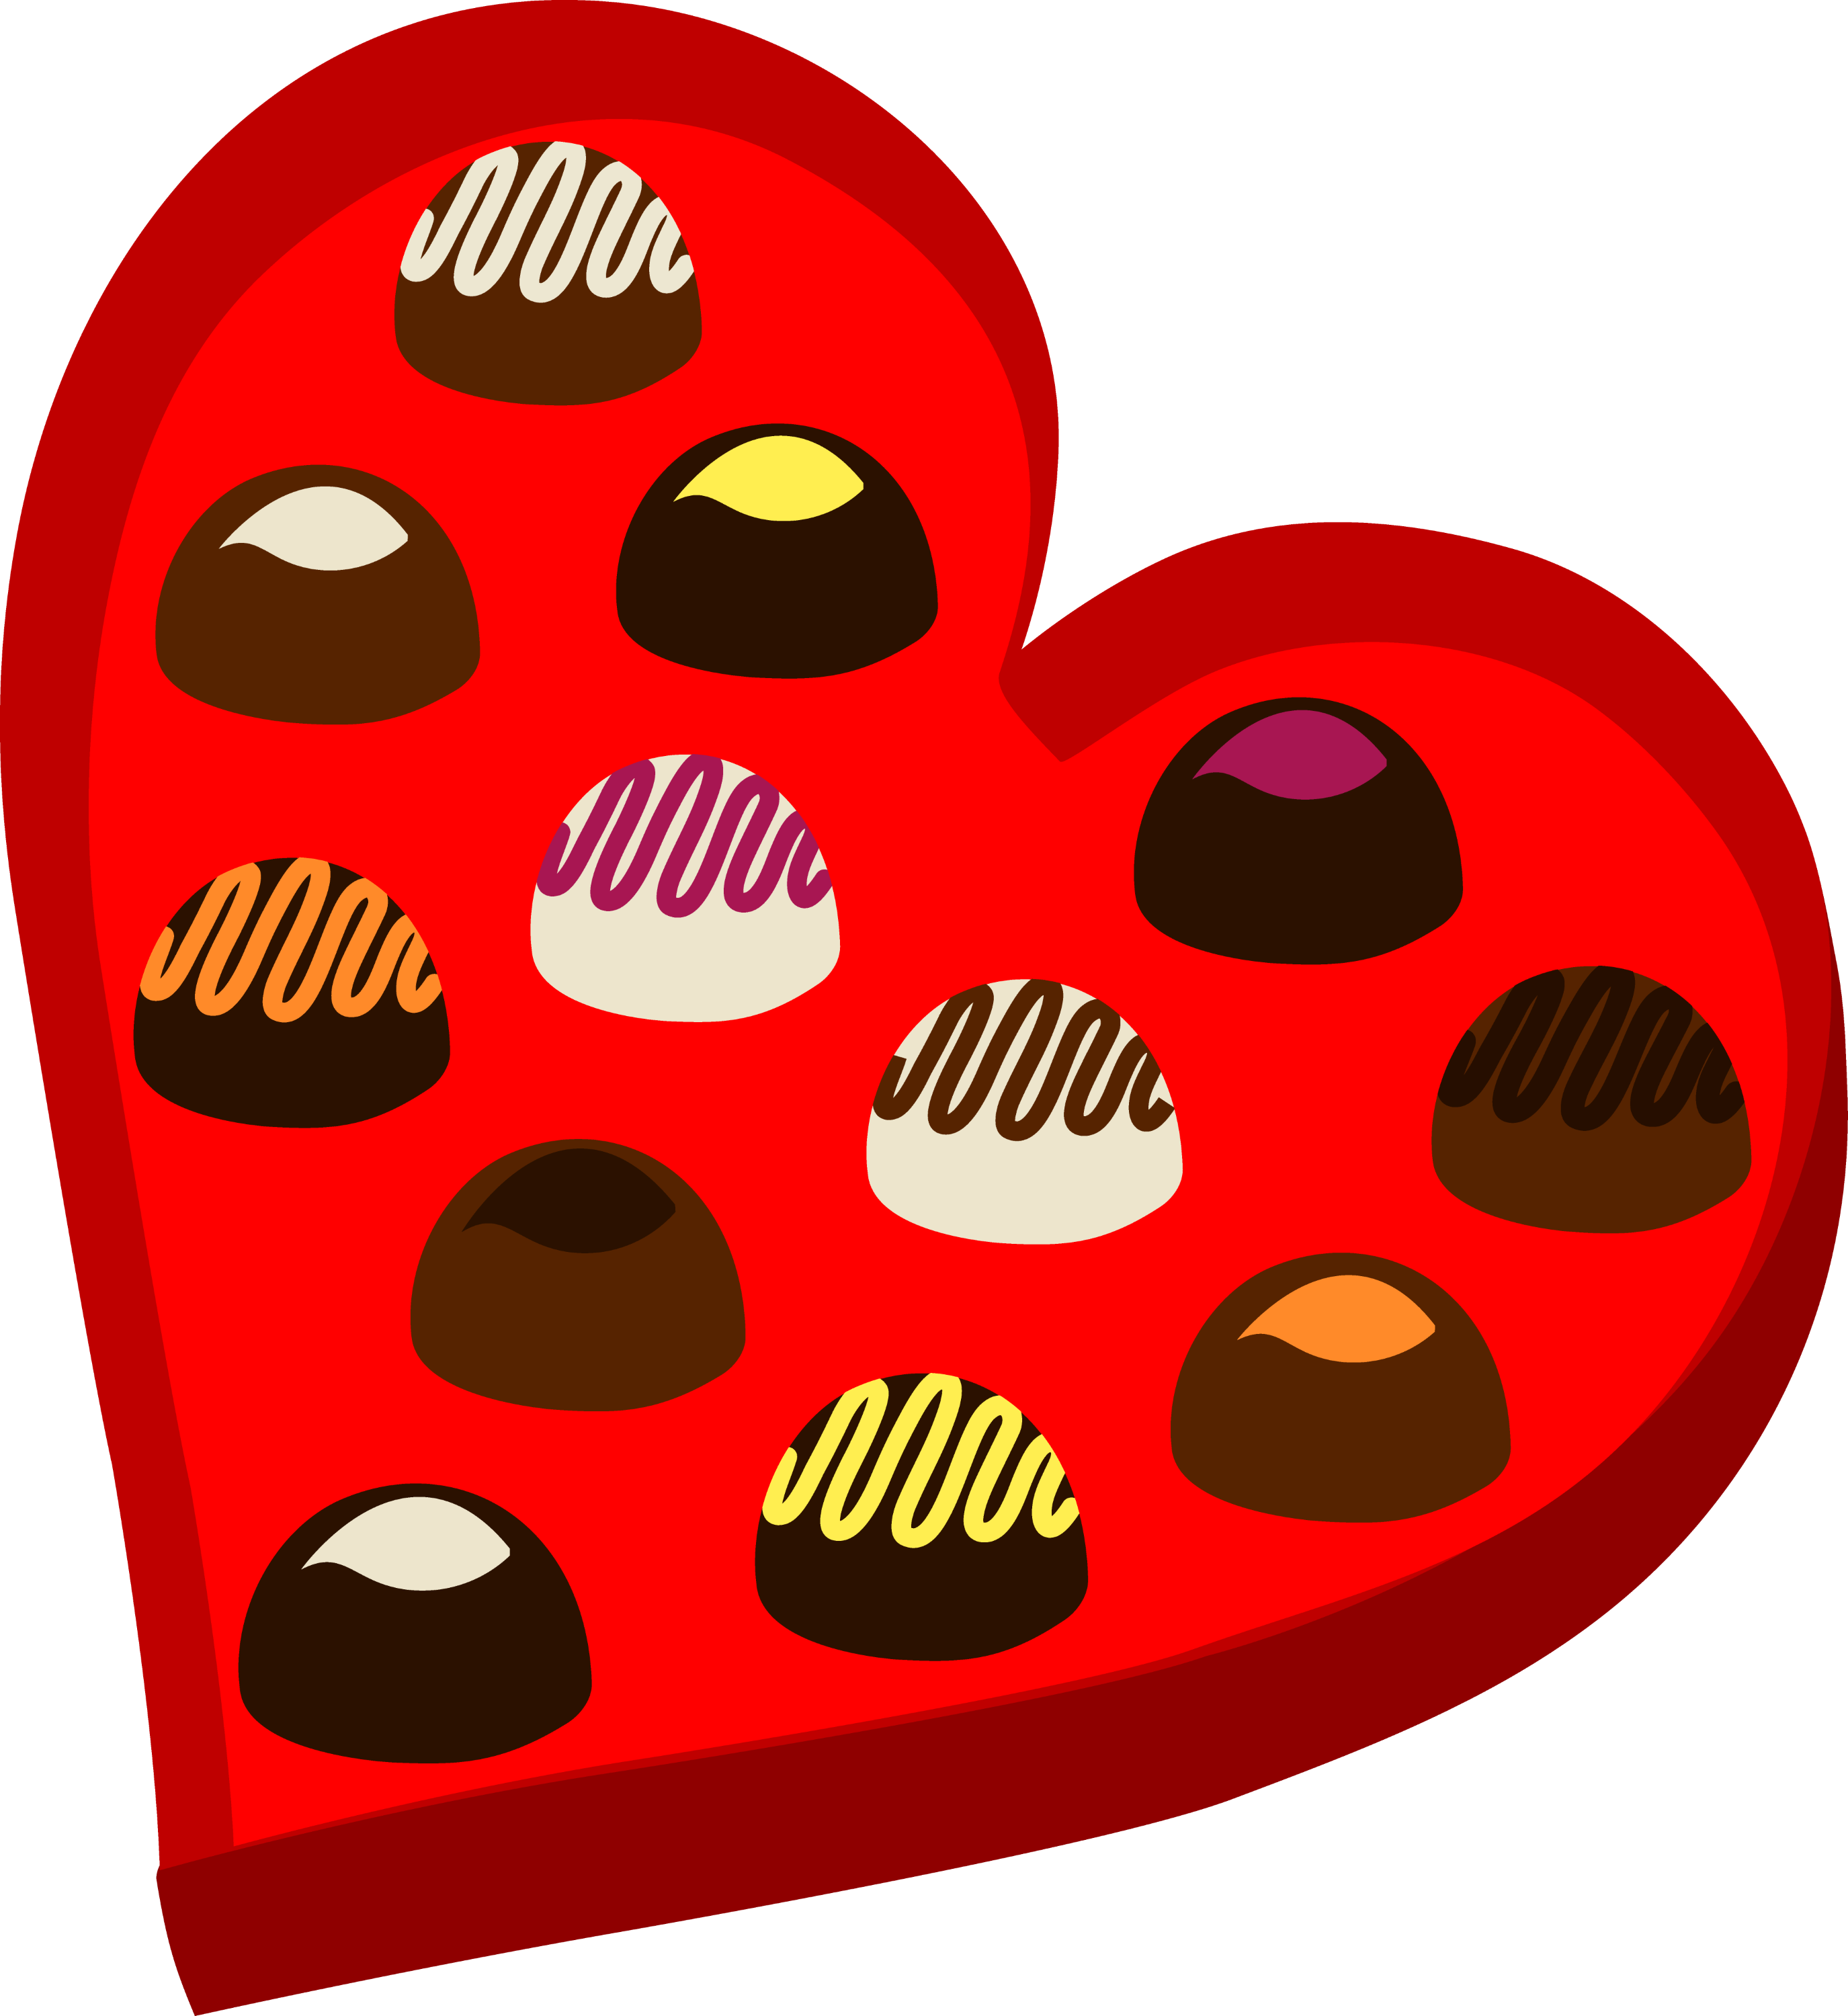 Valentines Day Candy Hearts Clip Art Box of valentines day